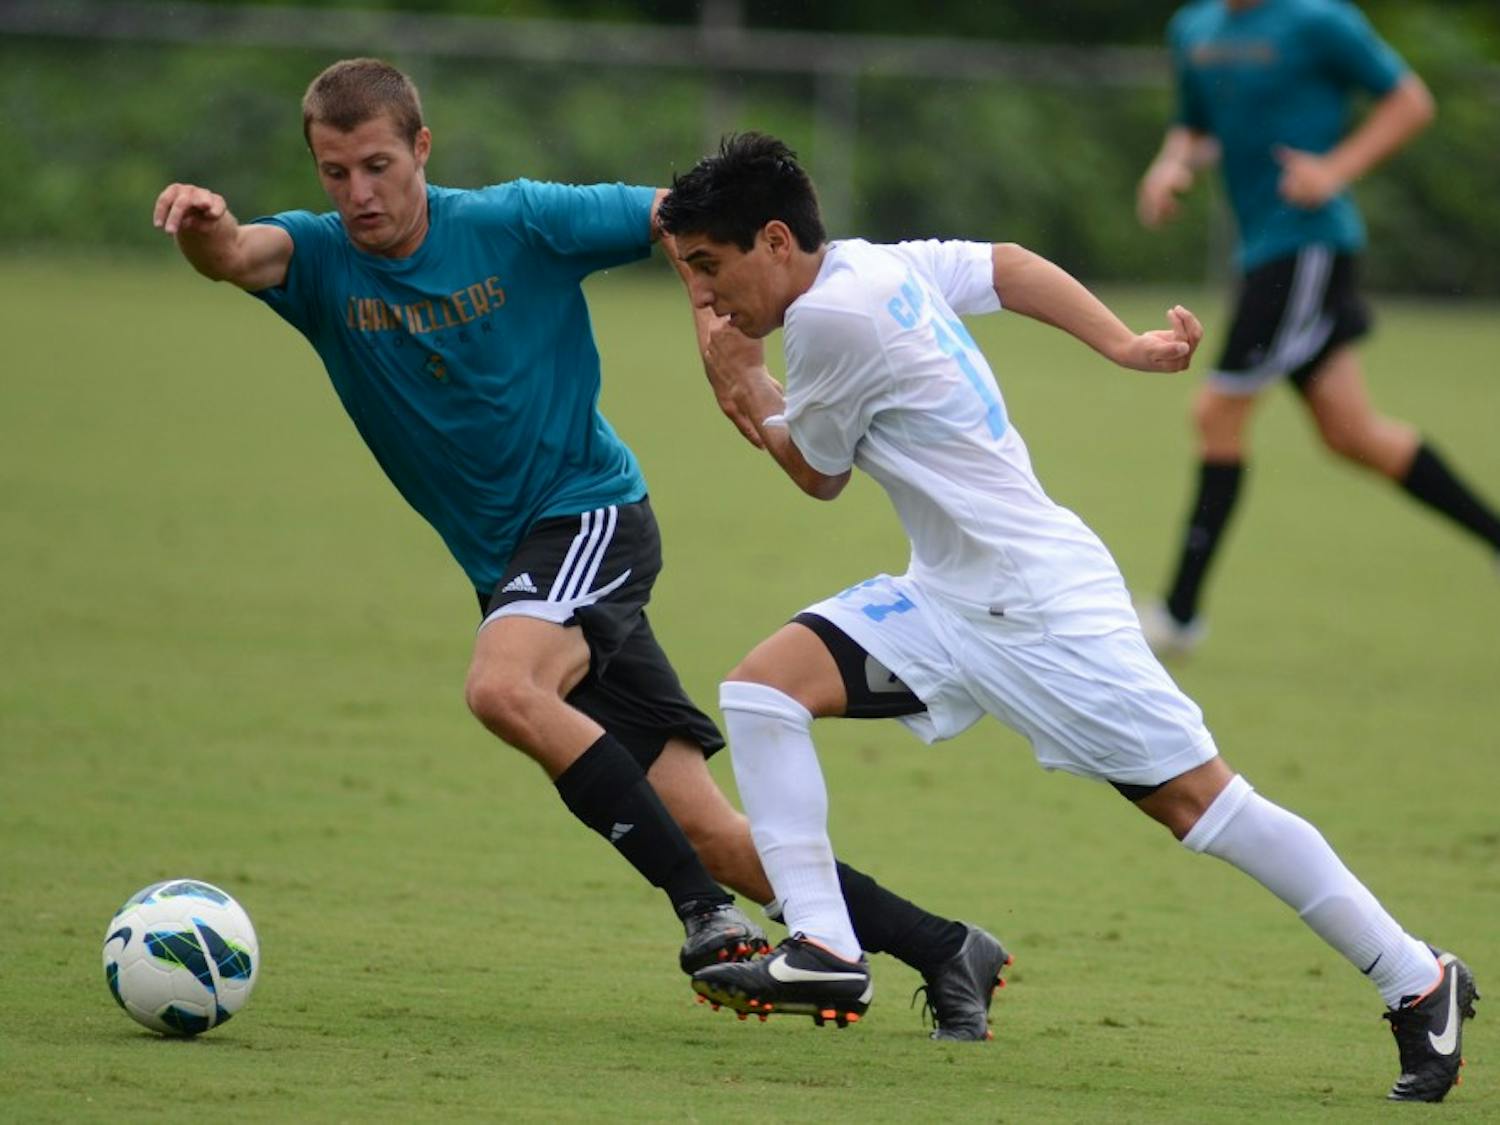 	The UNC men&#8217;s soccer team tied Coastal Carolina 1-1 at the exhibition game held in Cary, on August 19.